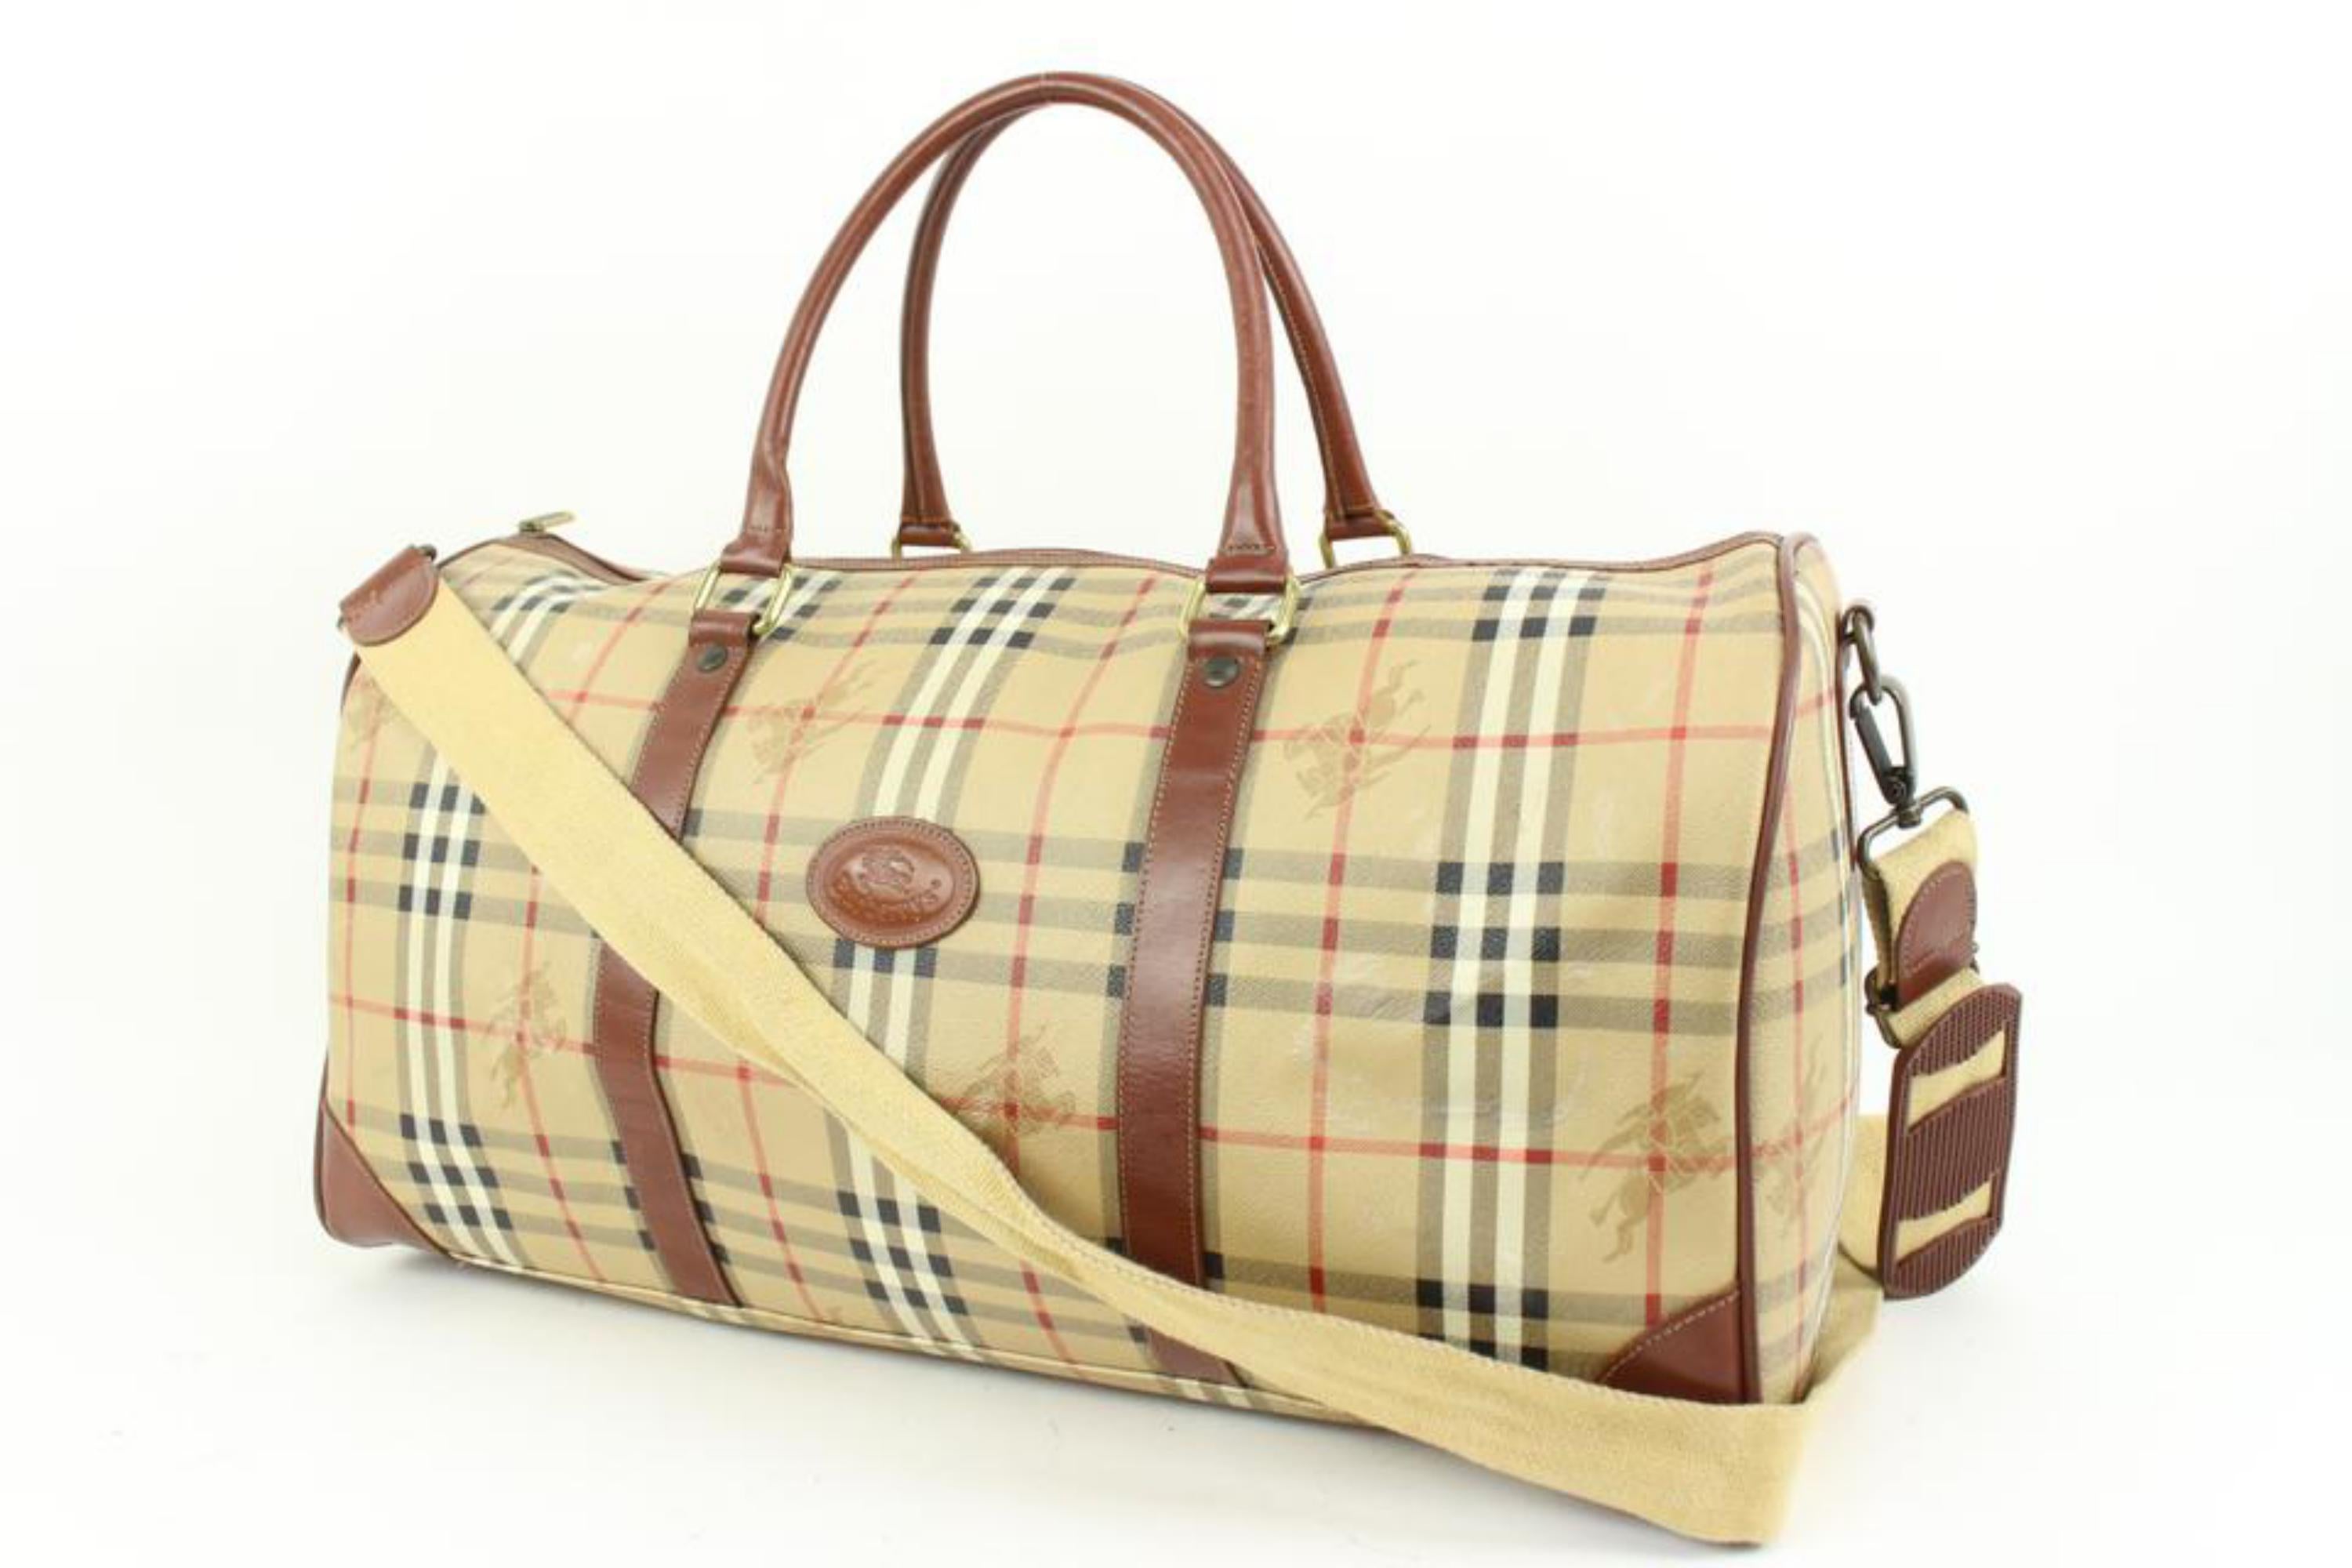 Burberry Beige Nova Check Duffle Bag with Strap Boston Upcycle ready 65b421s
Made In: Italy
Measurements: Length:  20